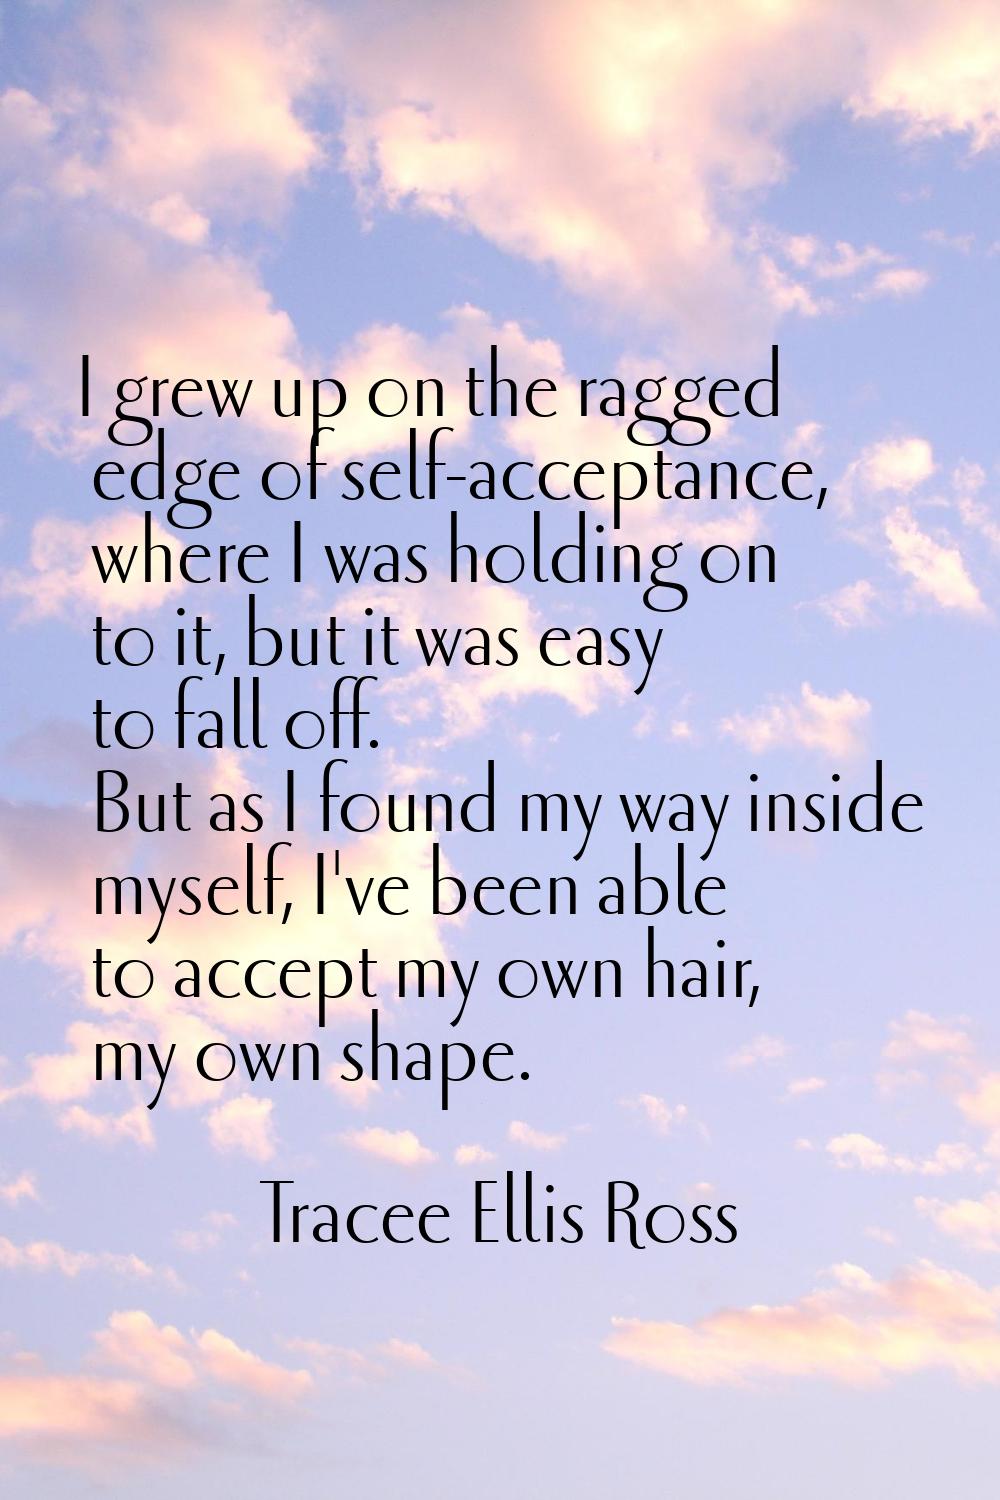 I grew up on the ragged edge of self-acceptance, where I was holding on to it, but it was easy to f